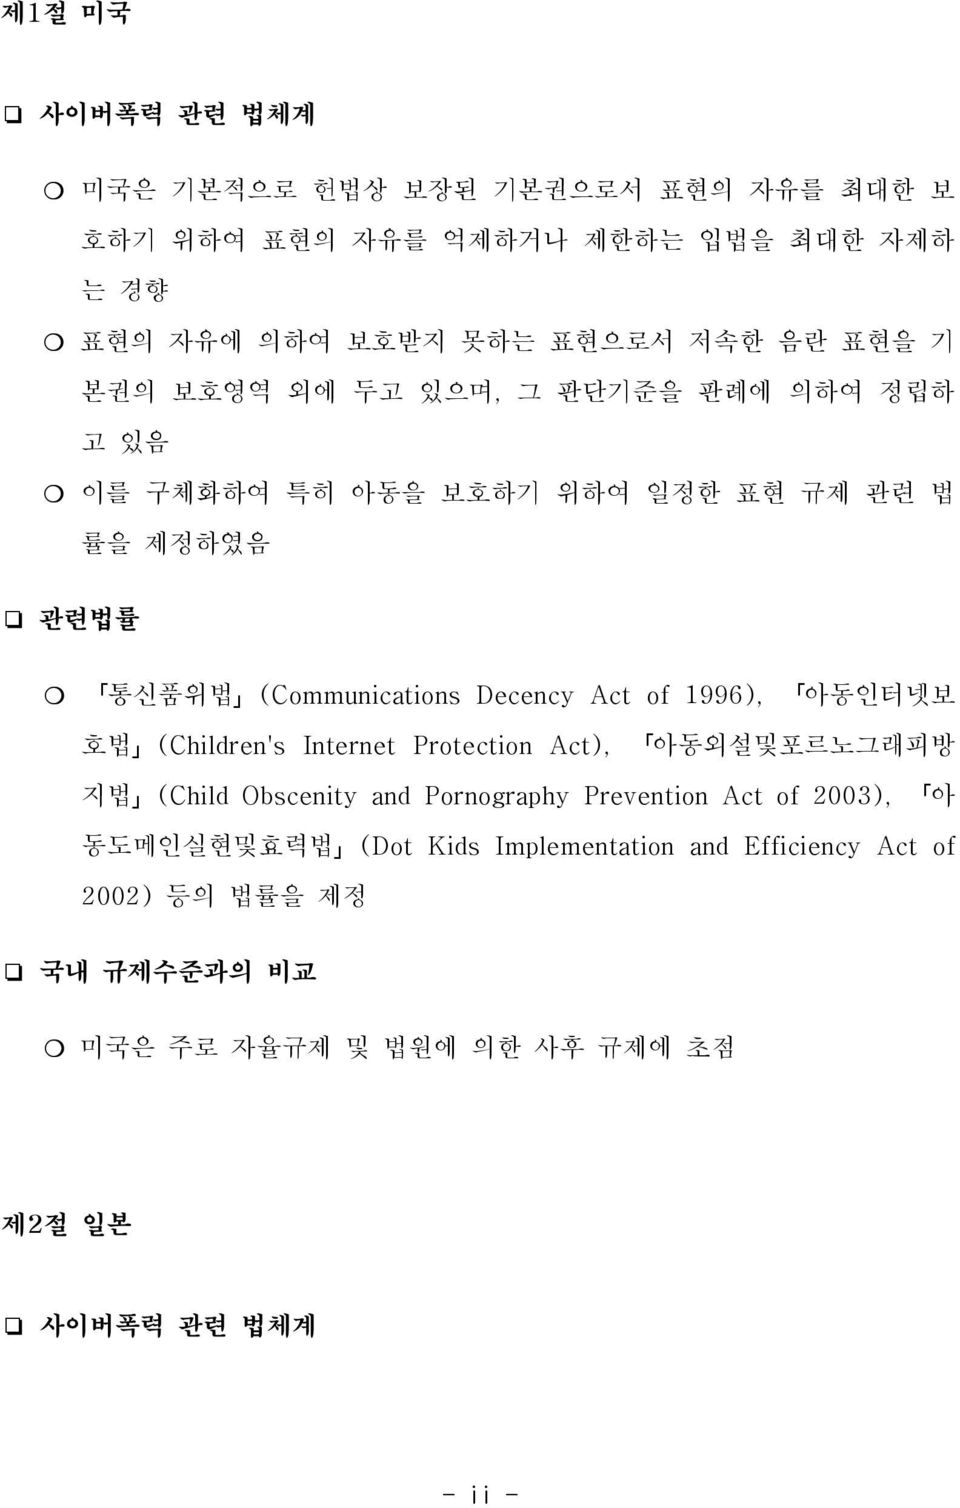 Act of 1996), 아동인터넷보 호법 (Children's Internet Protection Act), 아동외설및포르노그래피방 지법 (Child Obscenity and Pornography Prevention Act of 2003), 아